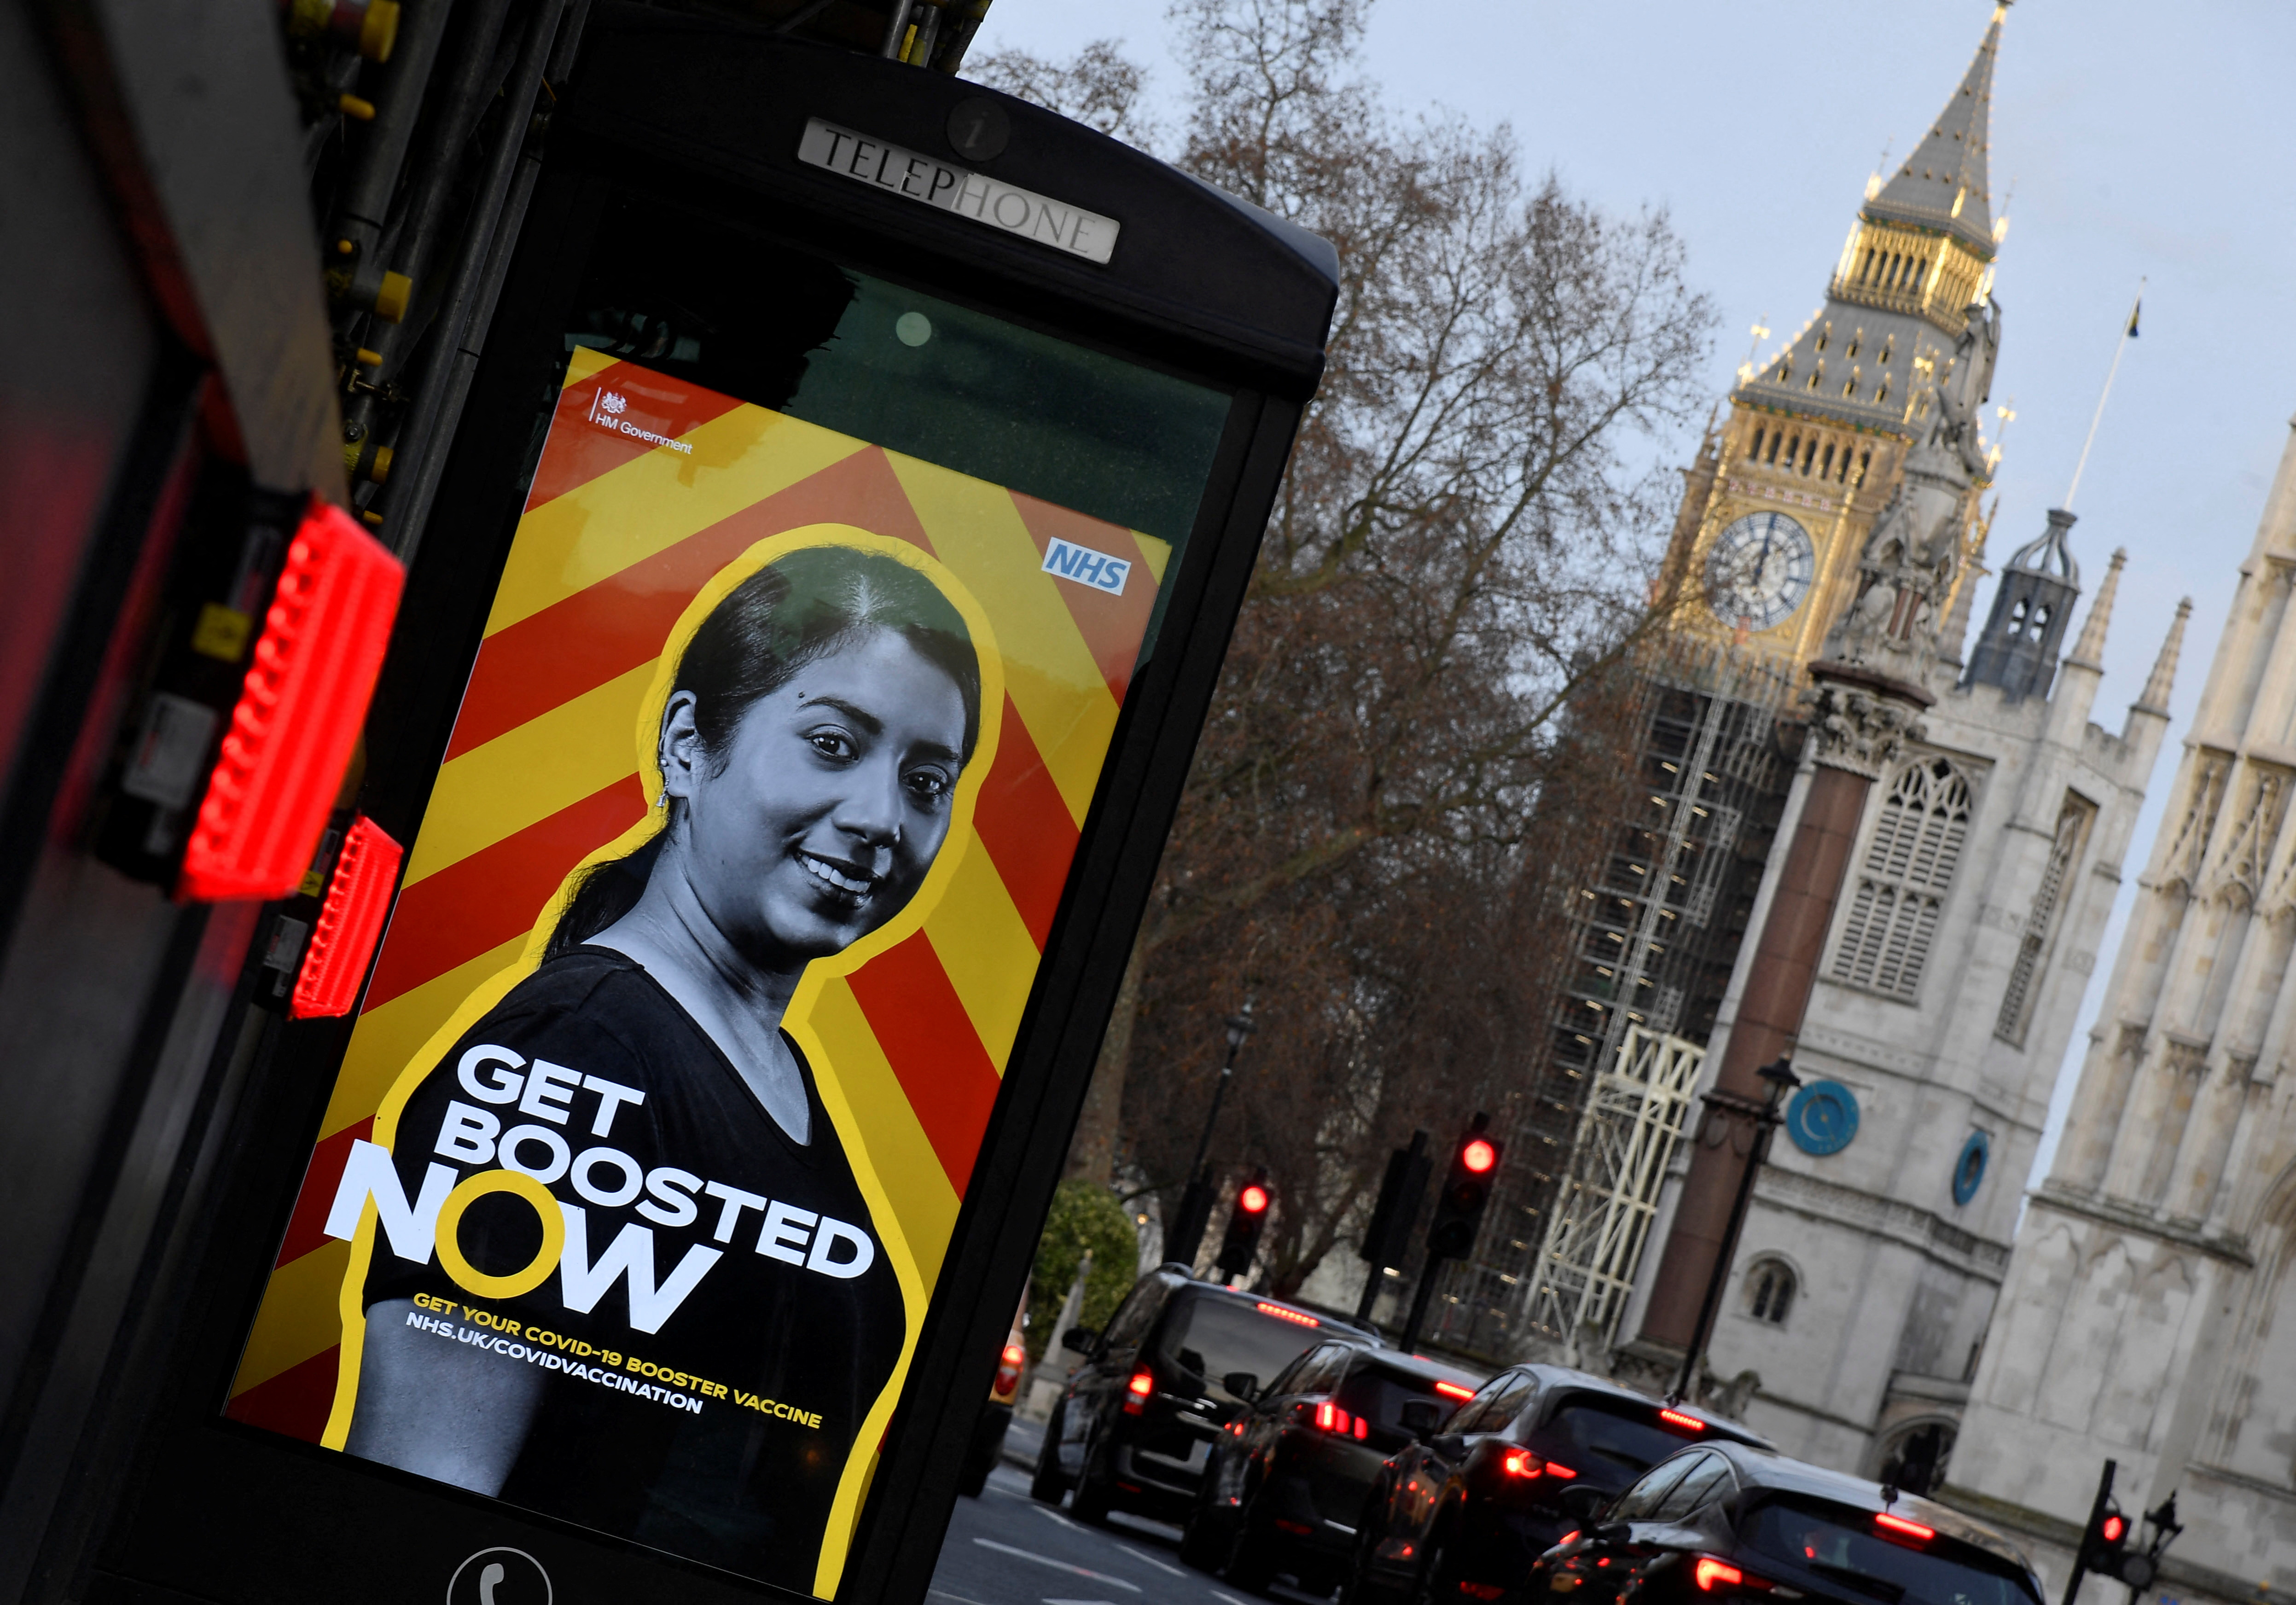 A public health advertisement encouraging people to get a booster vaccination is seen near Big Ben and the Houses of Parliament, amidst the spread of the coronavirus disease (COVID-19) pandemic, London